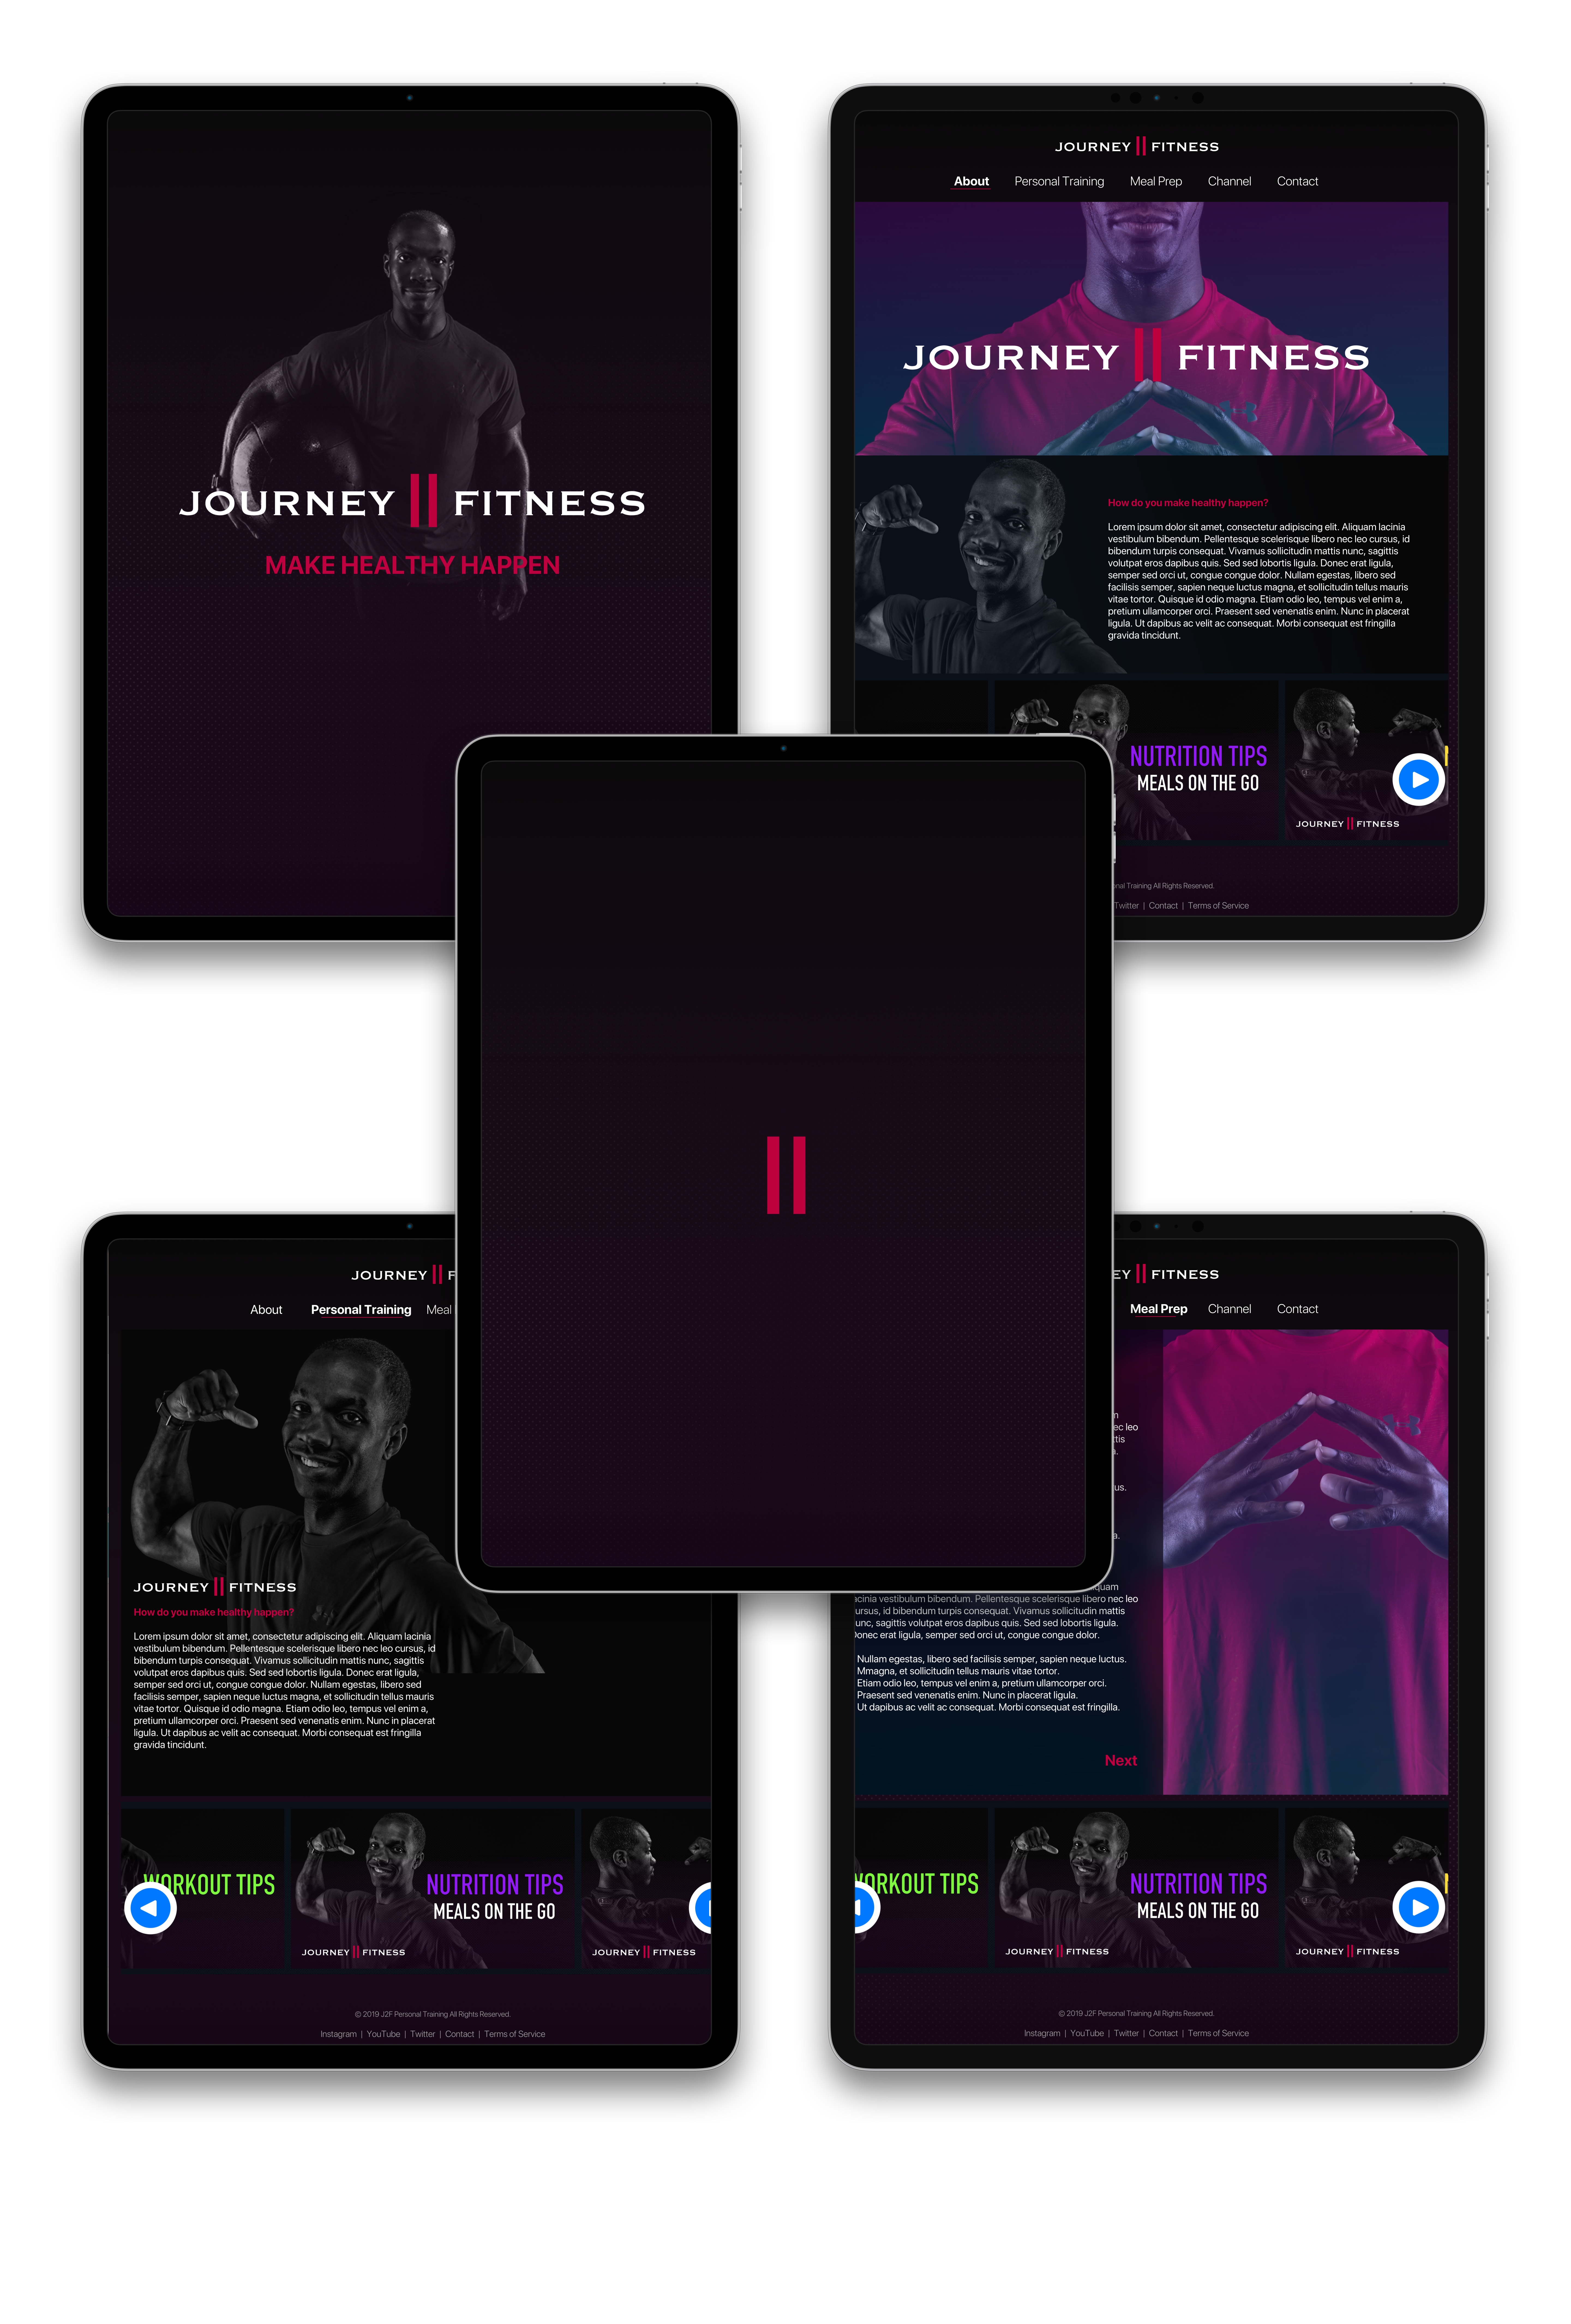 Journey to fitness website UX by Moera Creative